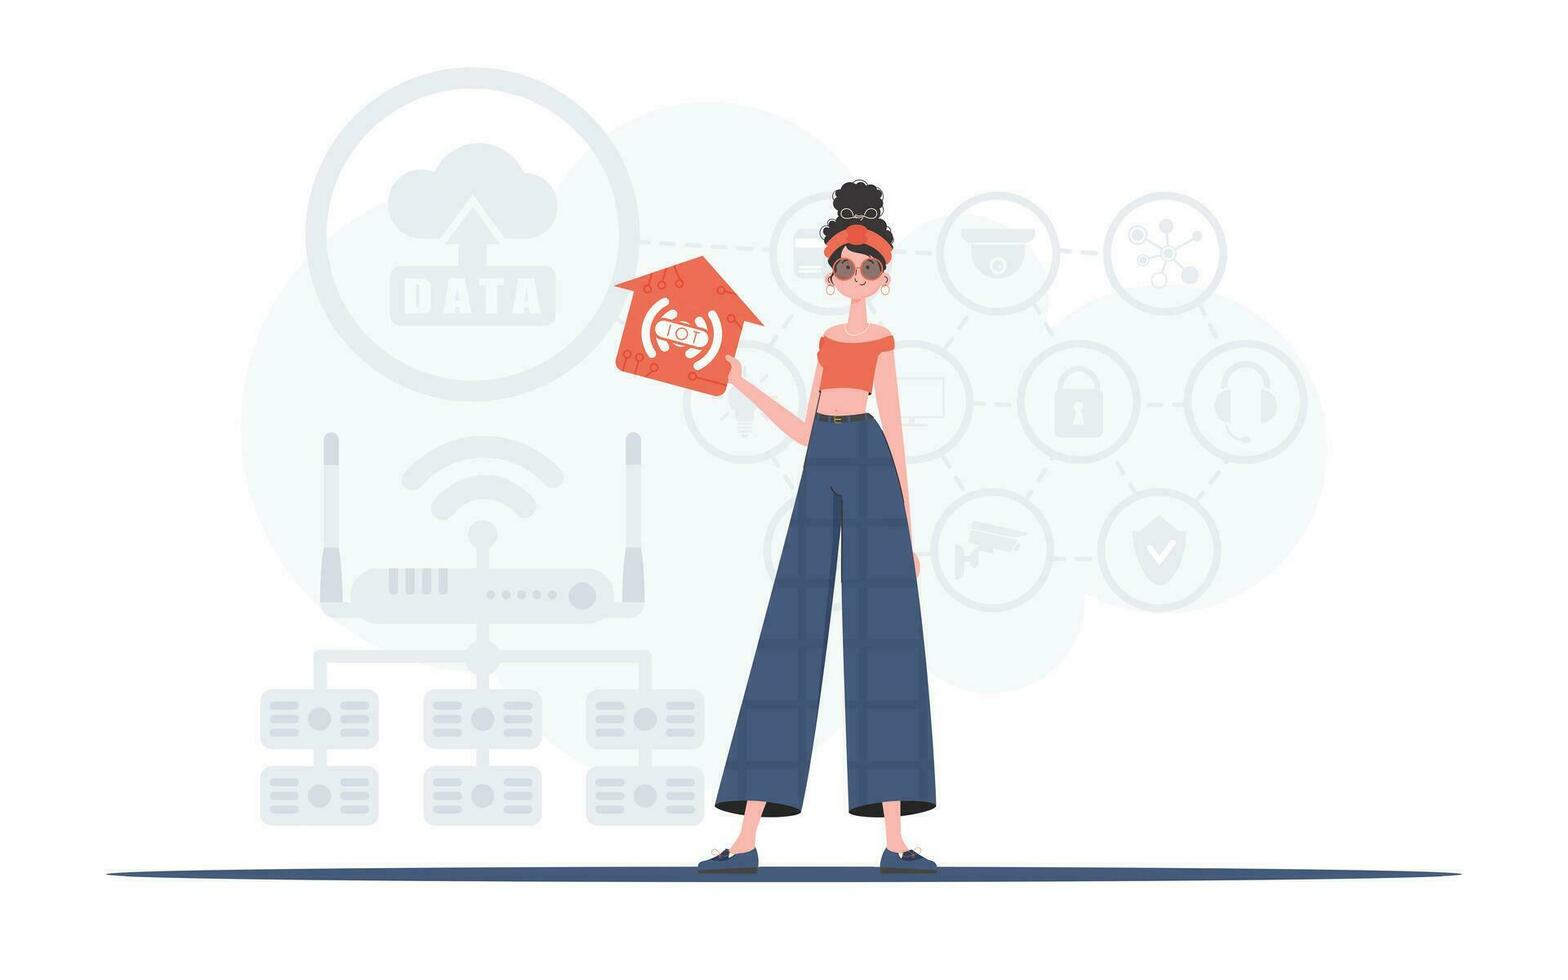 IoT concept. The woman is depicted in full growth, holding an icon of a house in her hands. Good for presentations. Vector illustration in flat style.